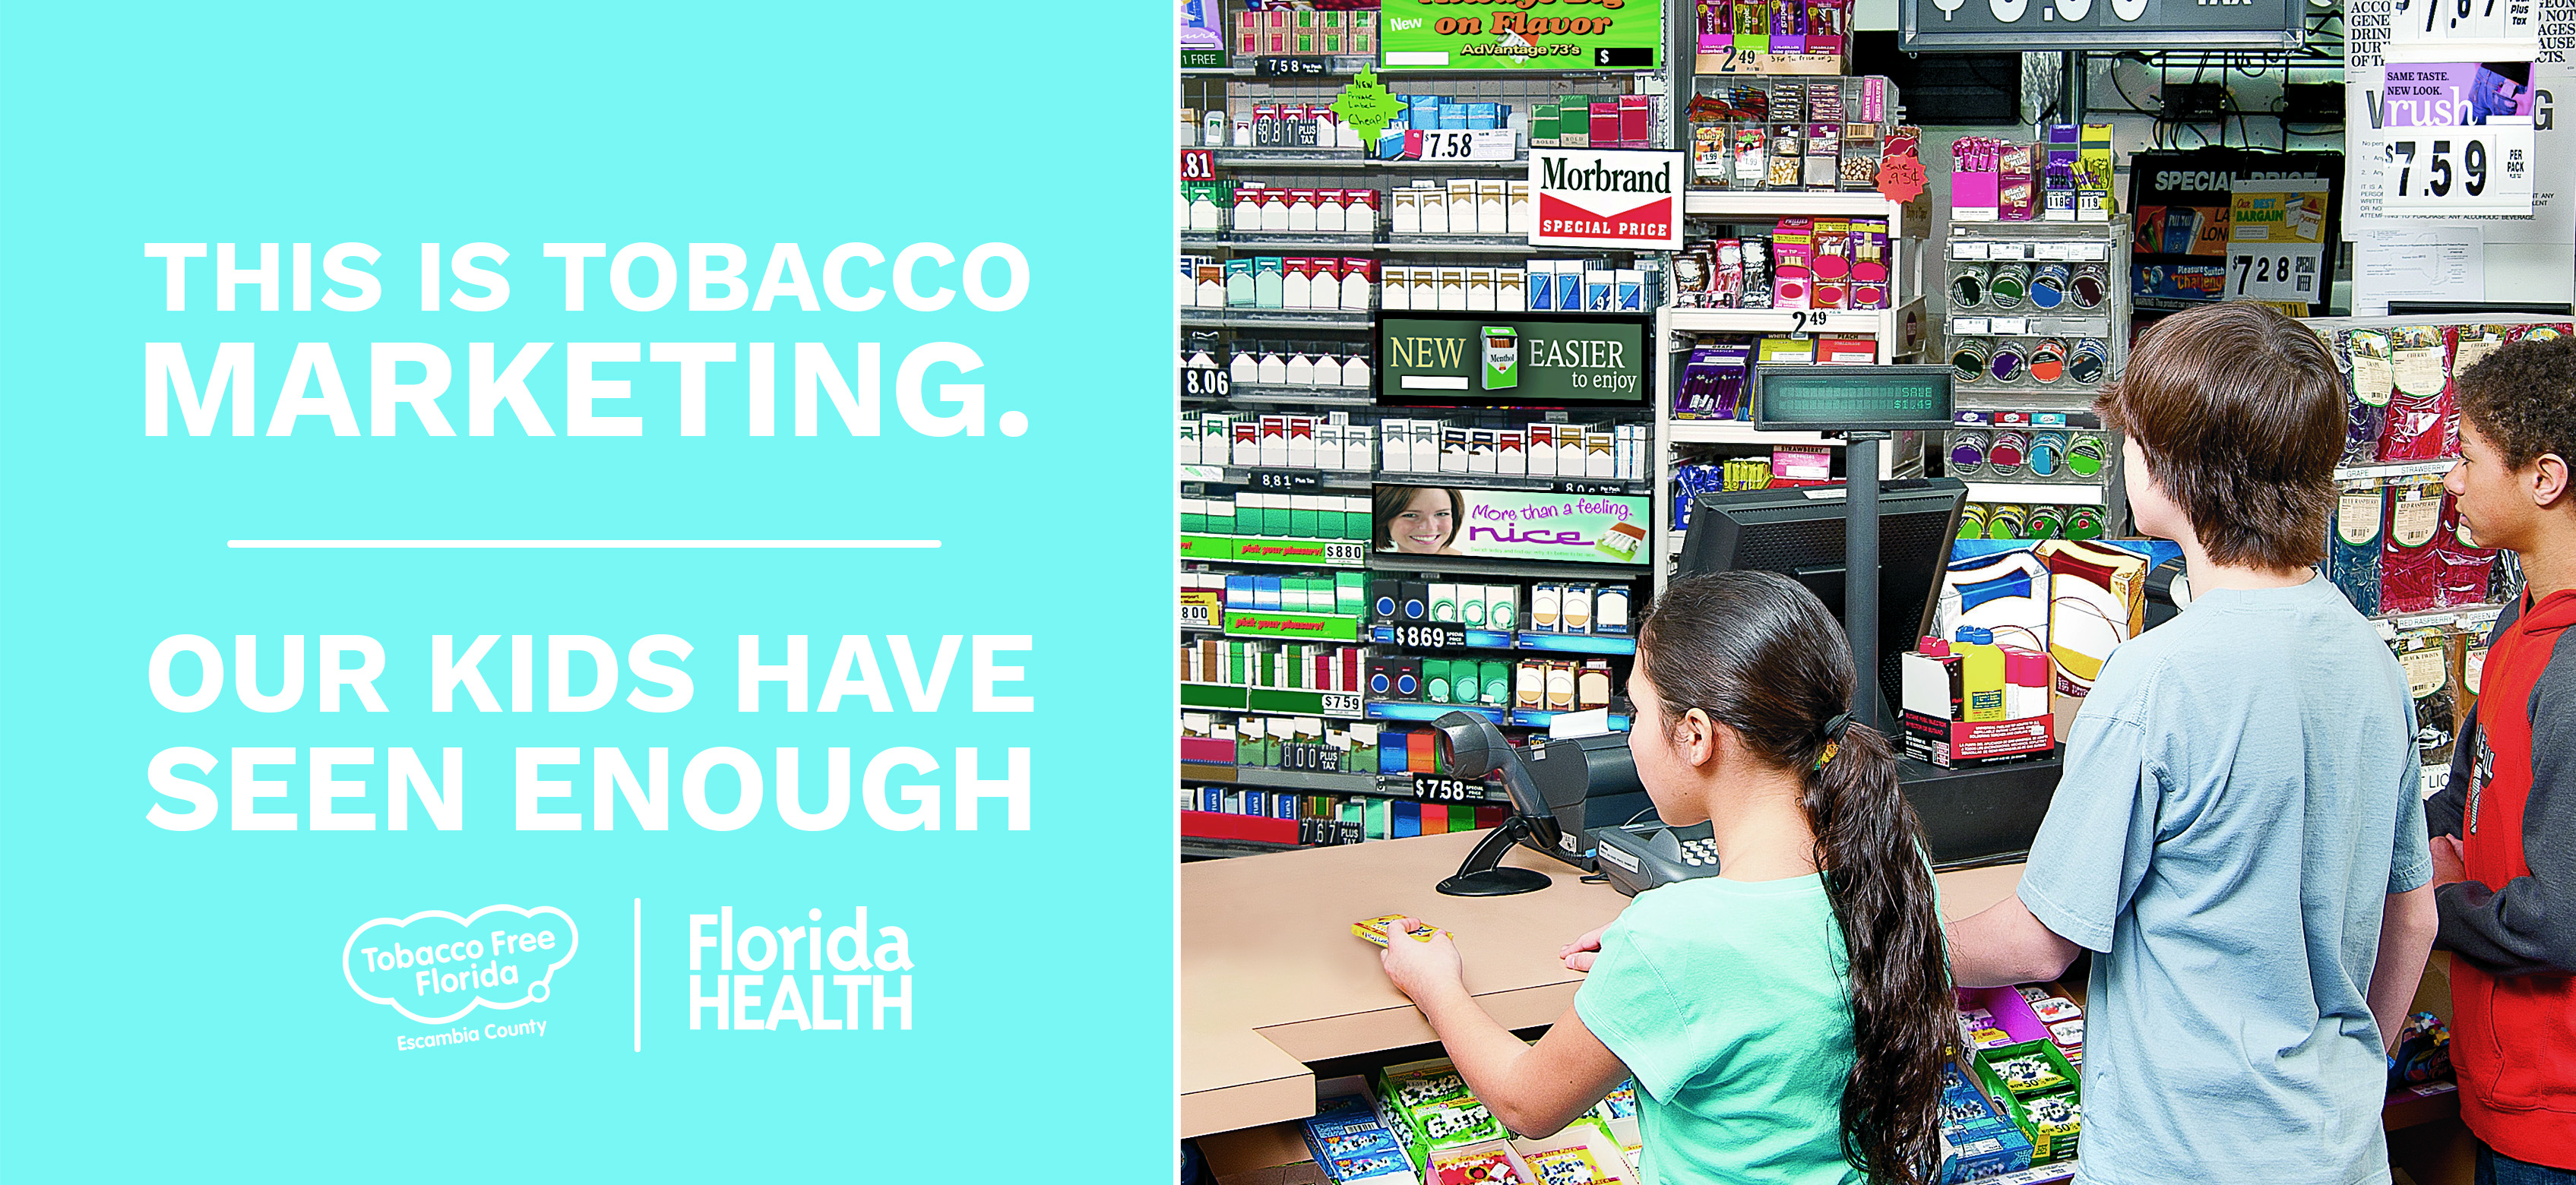 This is tobacco marketing our kids have seen enough tobacco free florida escambia county and florida health